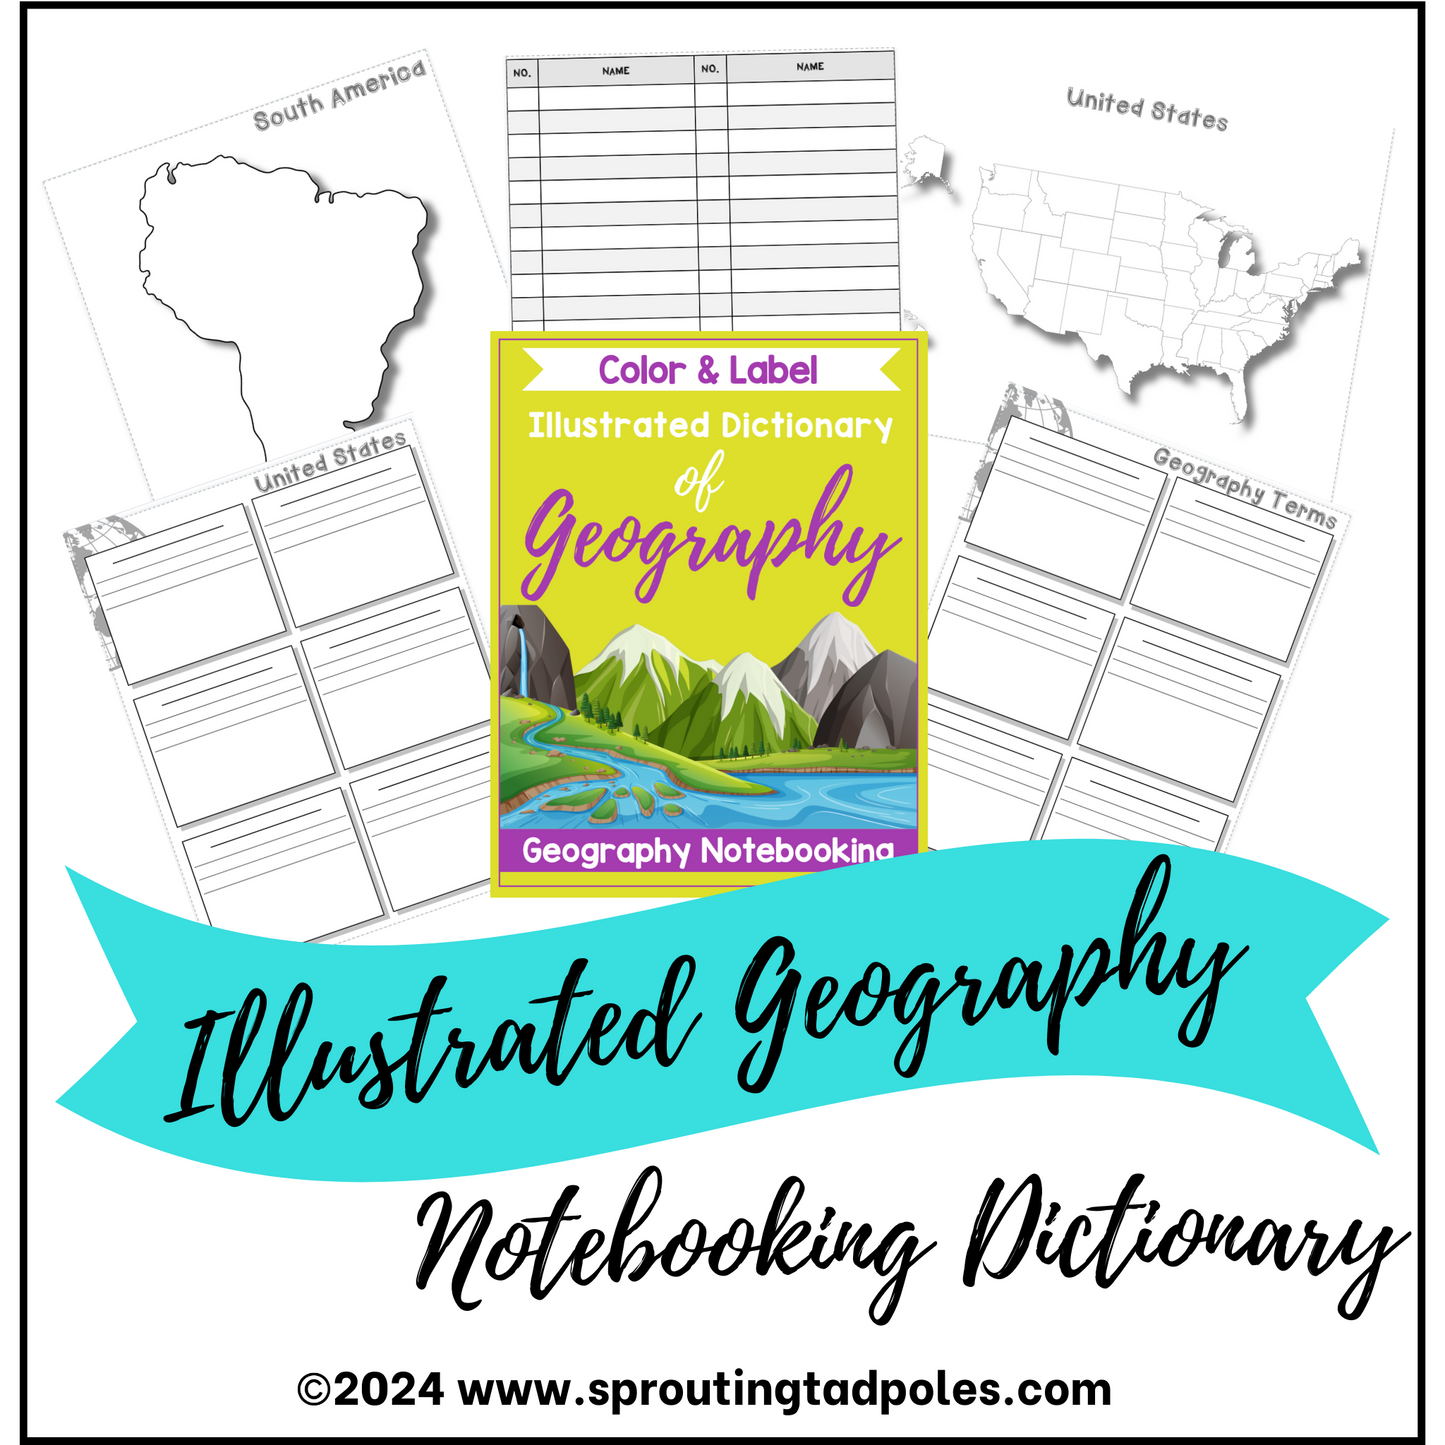 Geography Terms Memory Match: PHYSICAL + DIGITAL VERSION